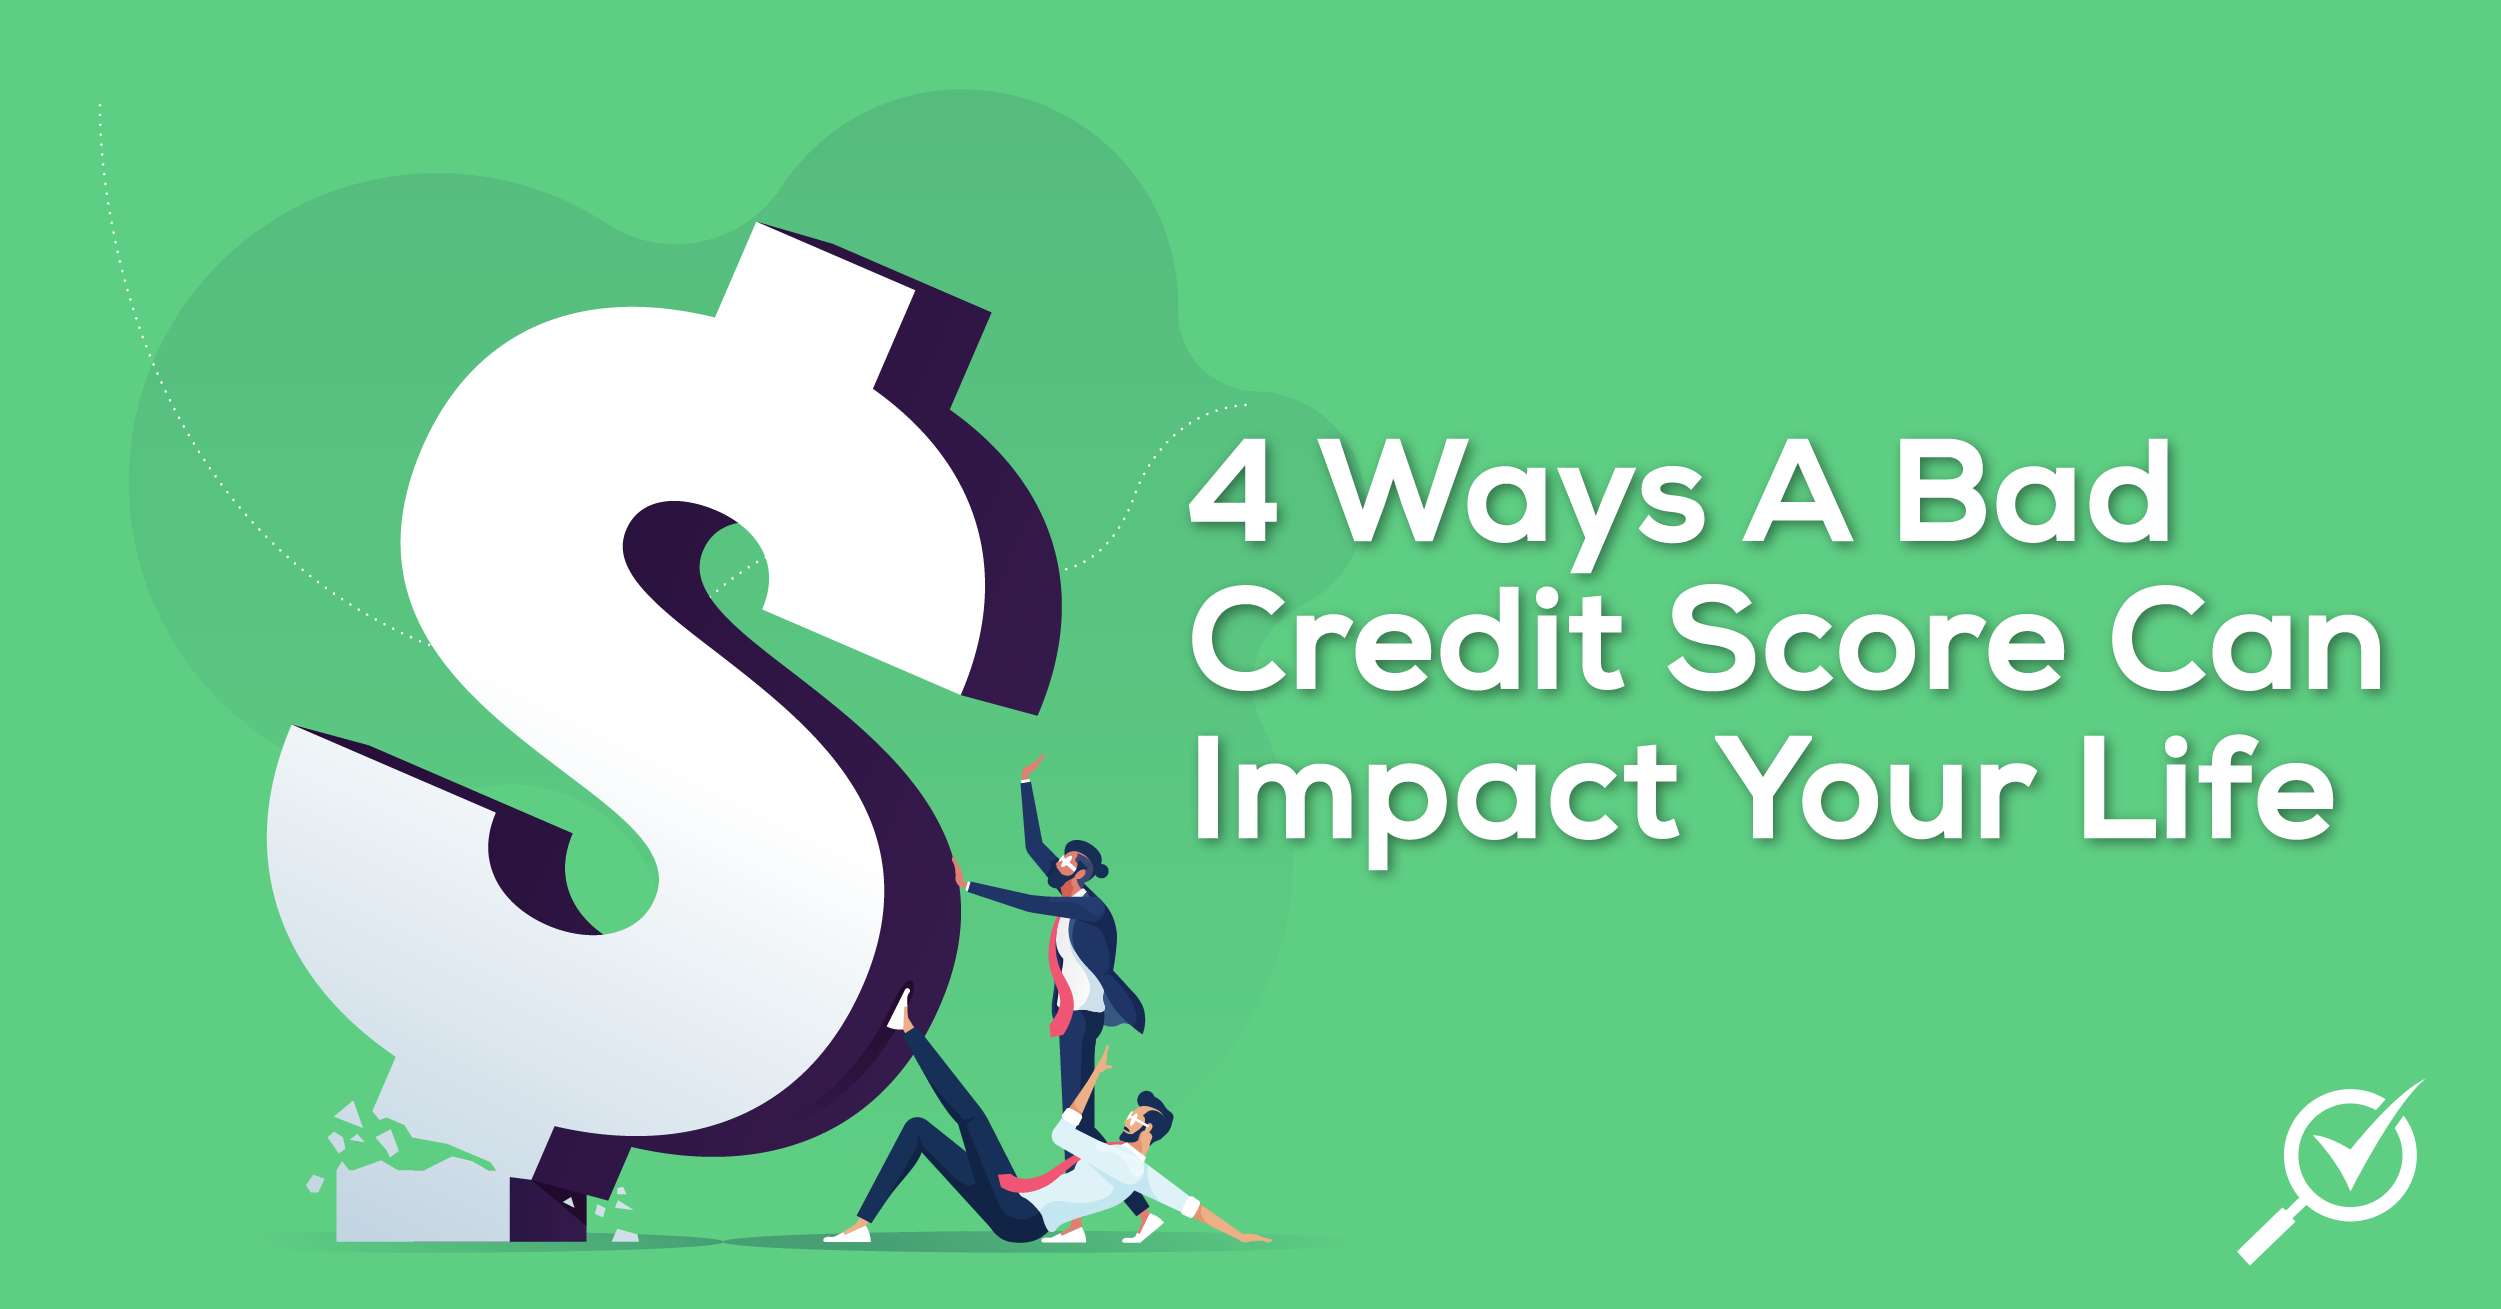 4 Ways A Bad Credit Score Can Impact Your Life (And How You Can Fix That)